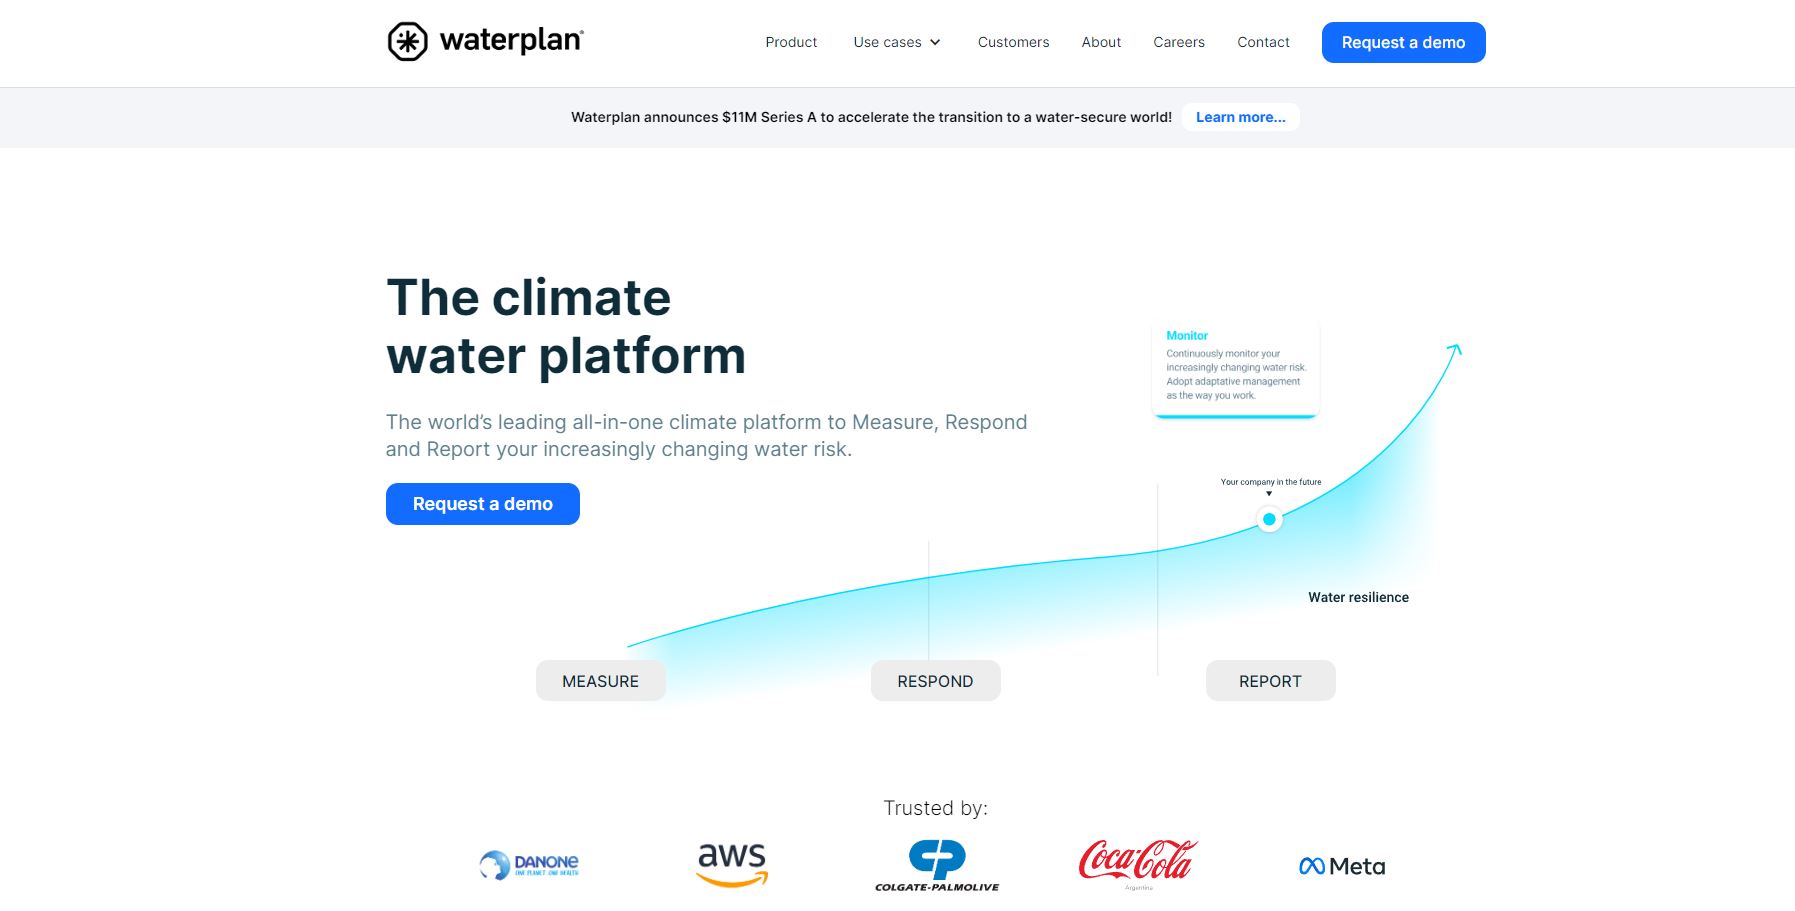 Waterplan, the game-changing startup that has secured an impressive $11M in Series A funding